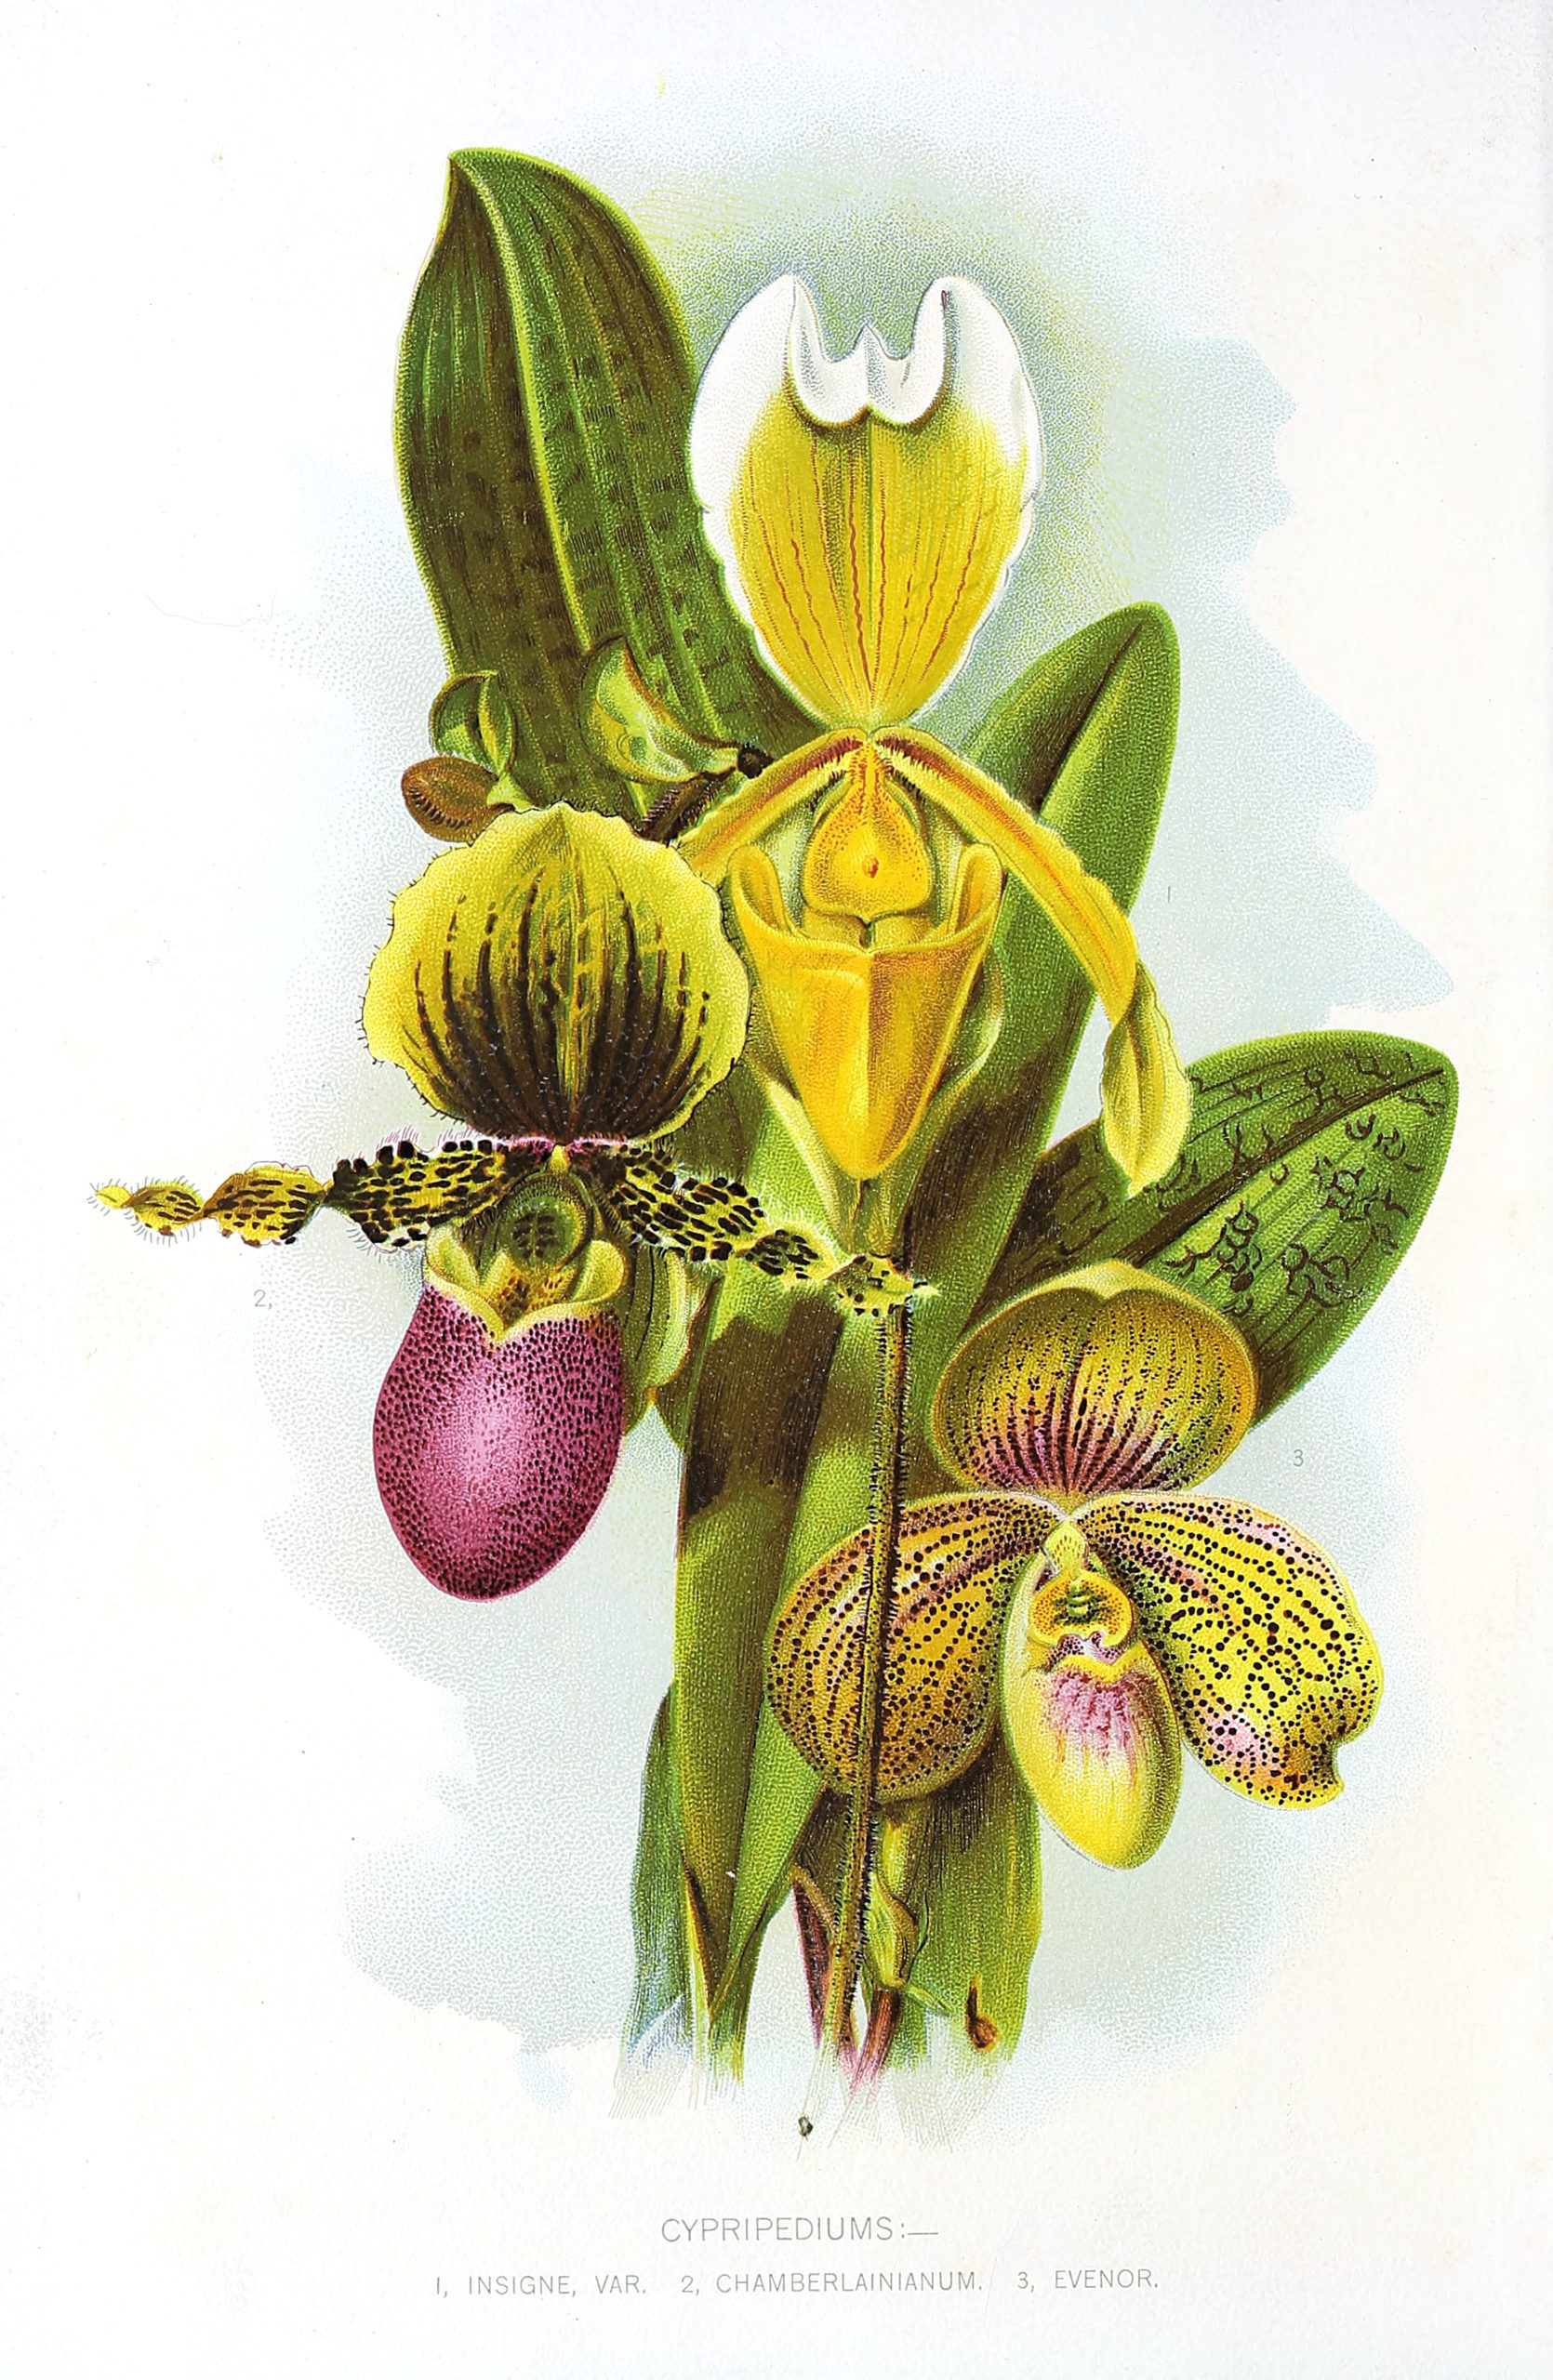 Vintage Botanical Prints - 70 in a series - Cypripediums from The gardener's assistant (1907)